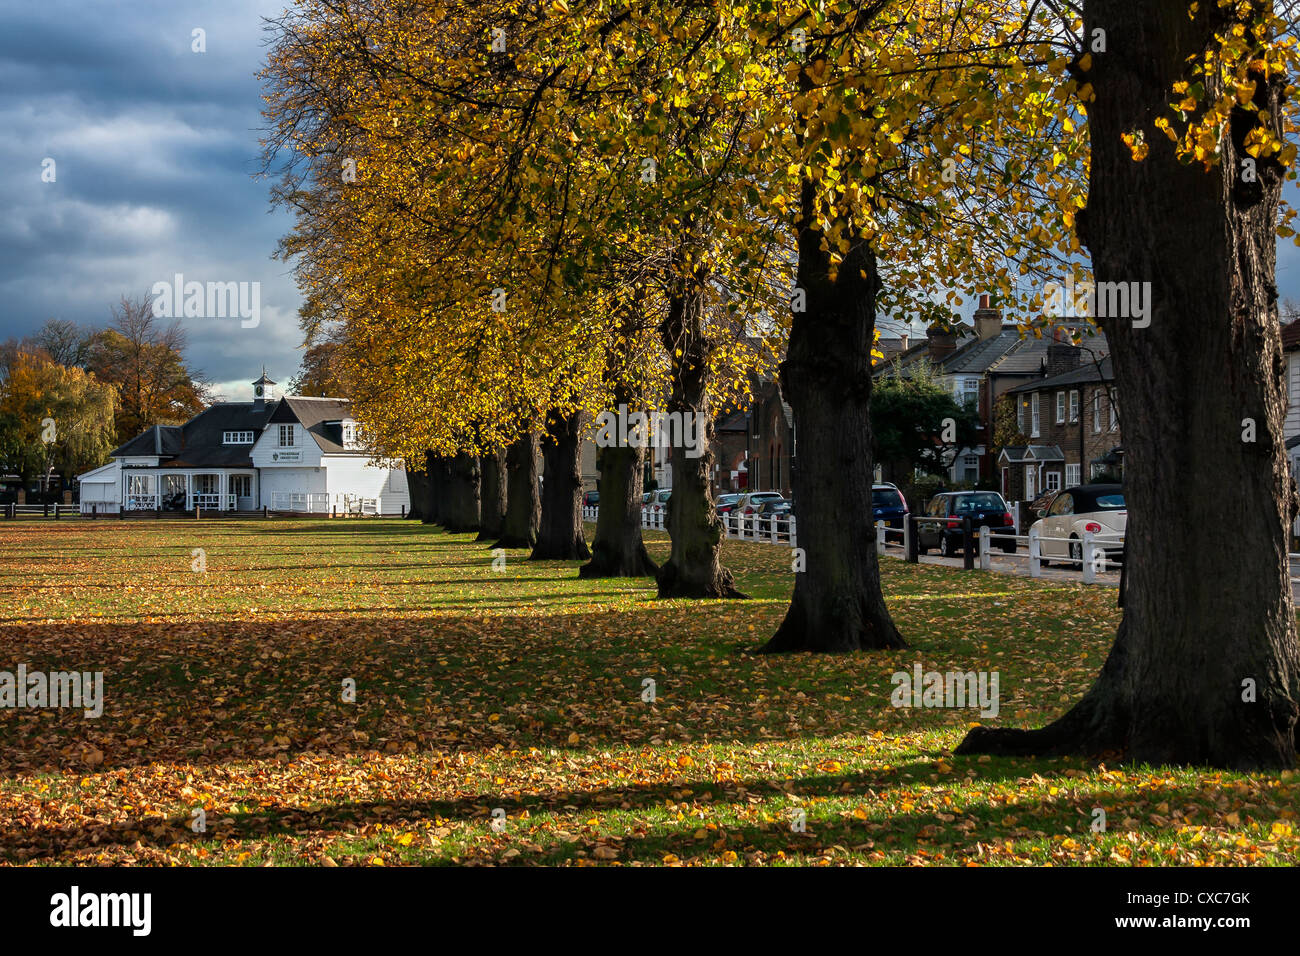 London, Twickenham Green cricket club pavilion  - a late afternoon in Autumn with colourful autumnal trees Stock Photo